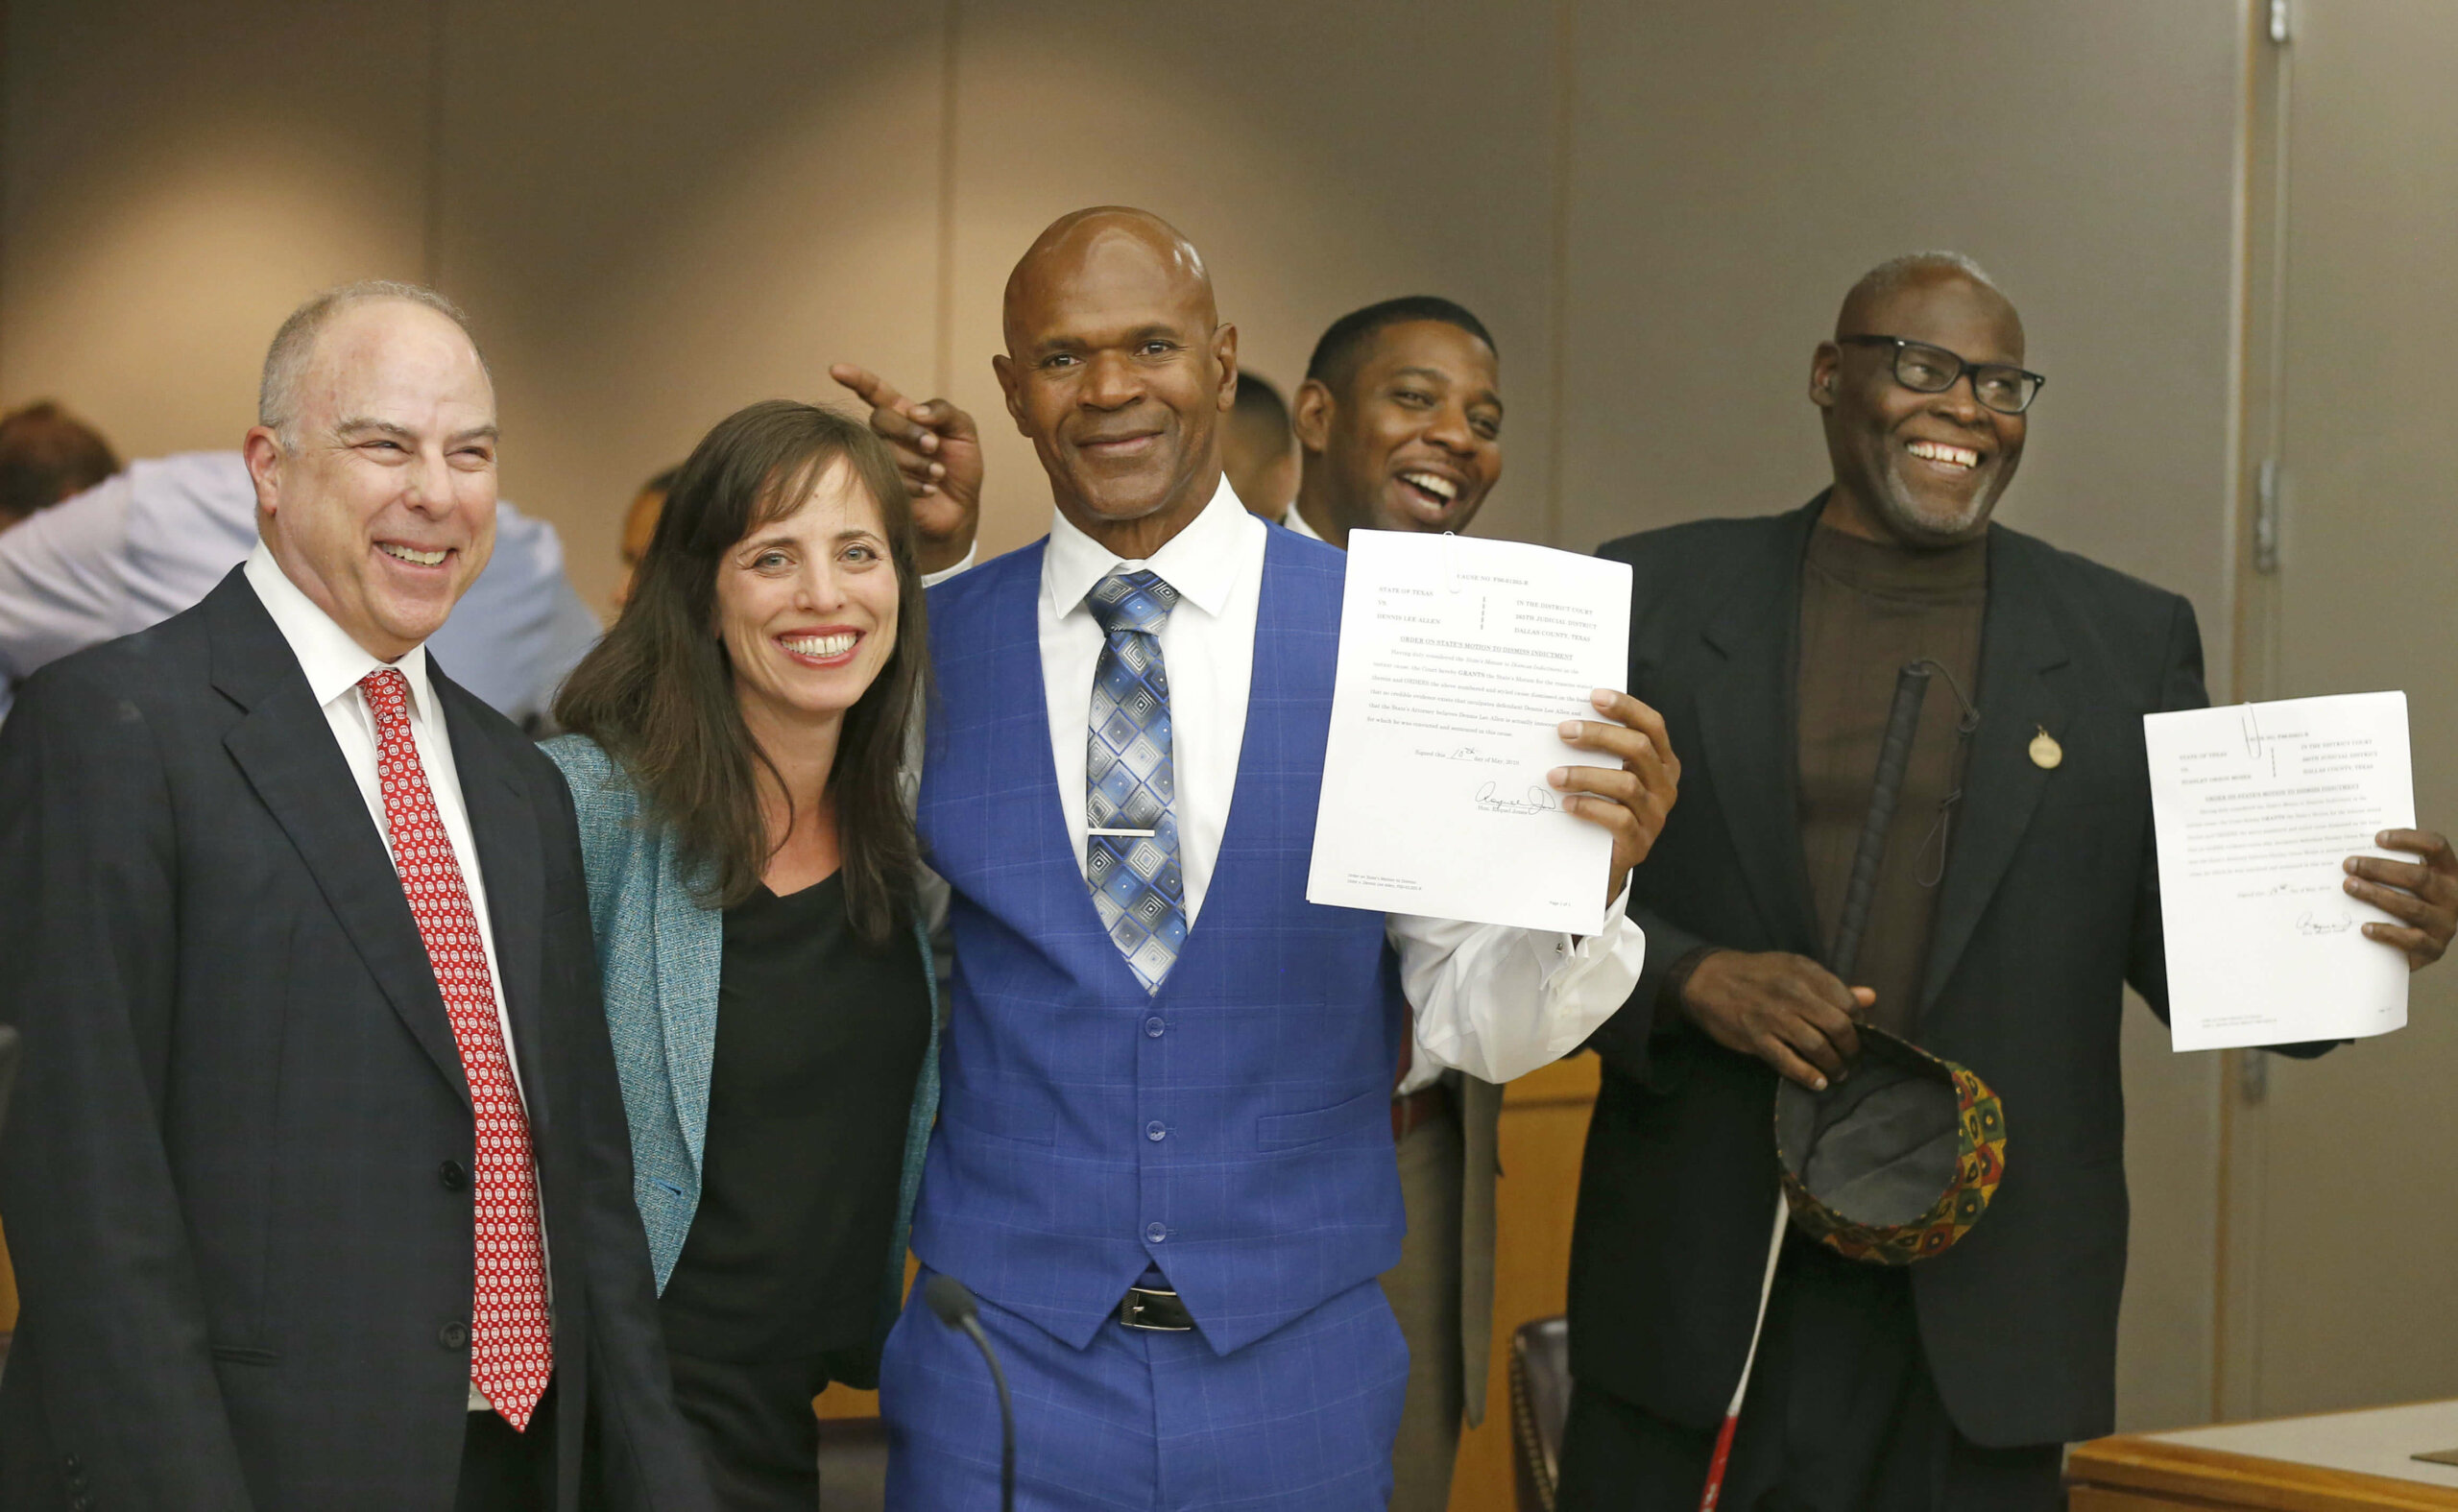 Group photo at courthouse with Dennis Lee Allen holding exoneration paperwork